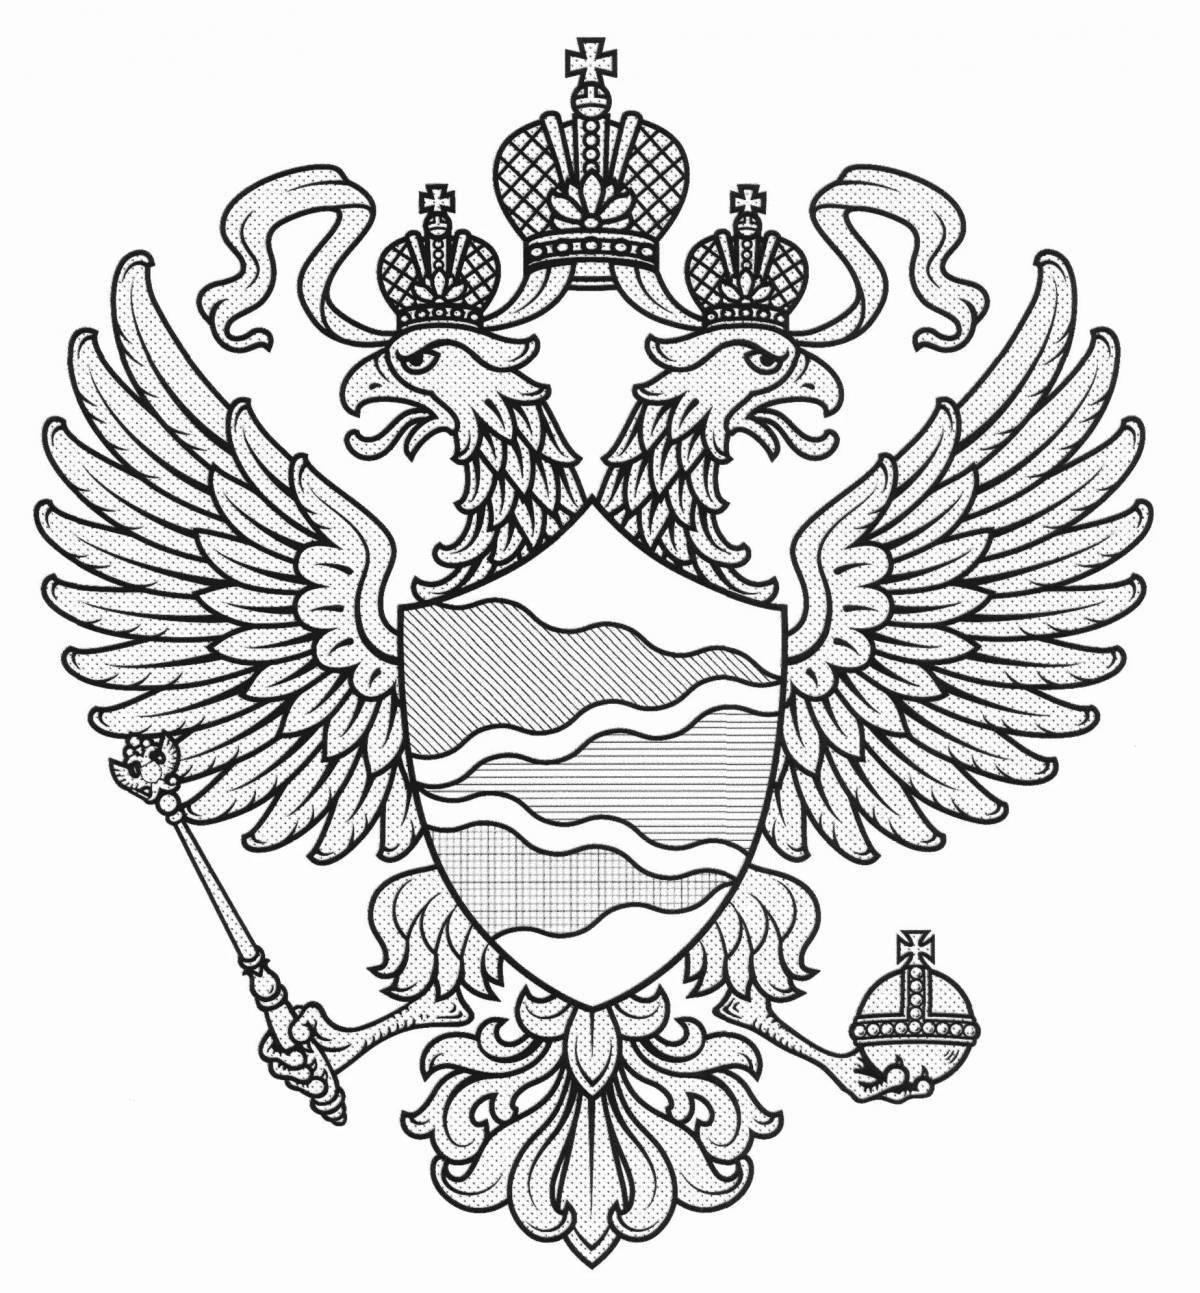 Famous double-headed eagle coloring page